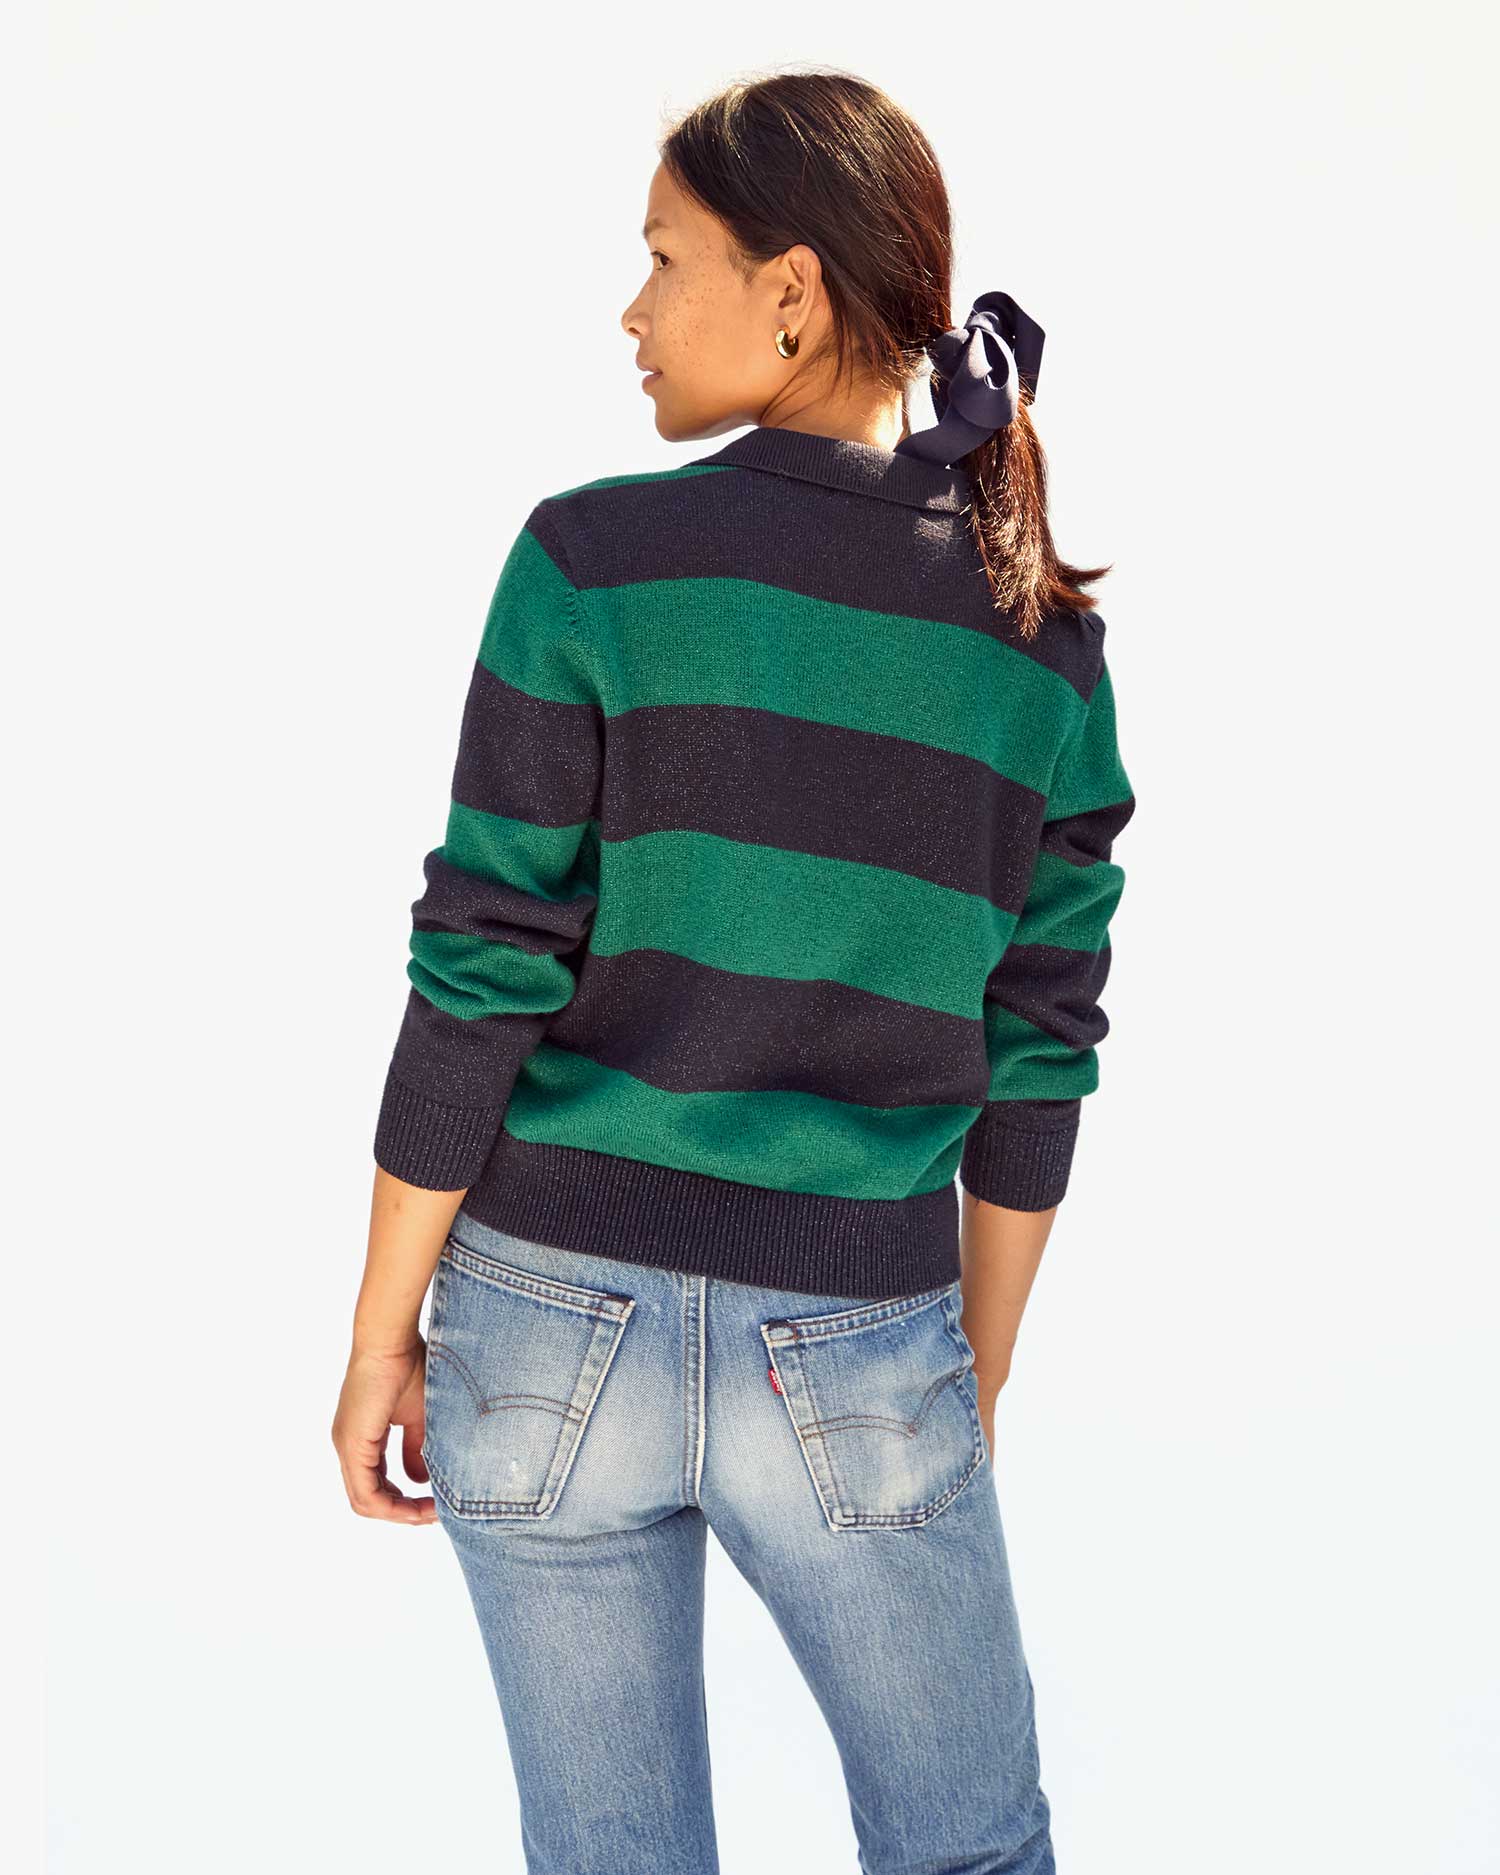 back view of Maly in the Navy & Green Stripe Heloise Polo Sweater with jeans